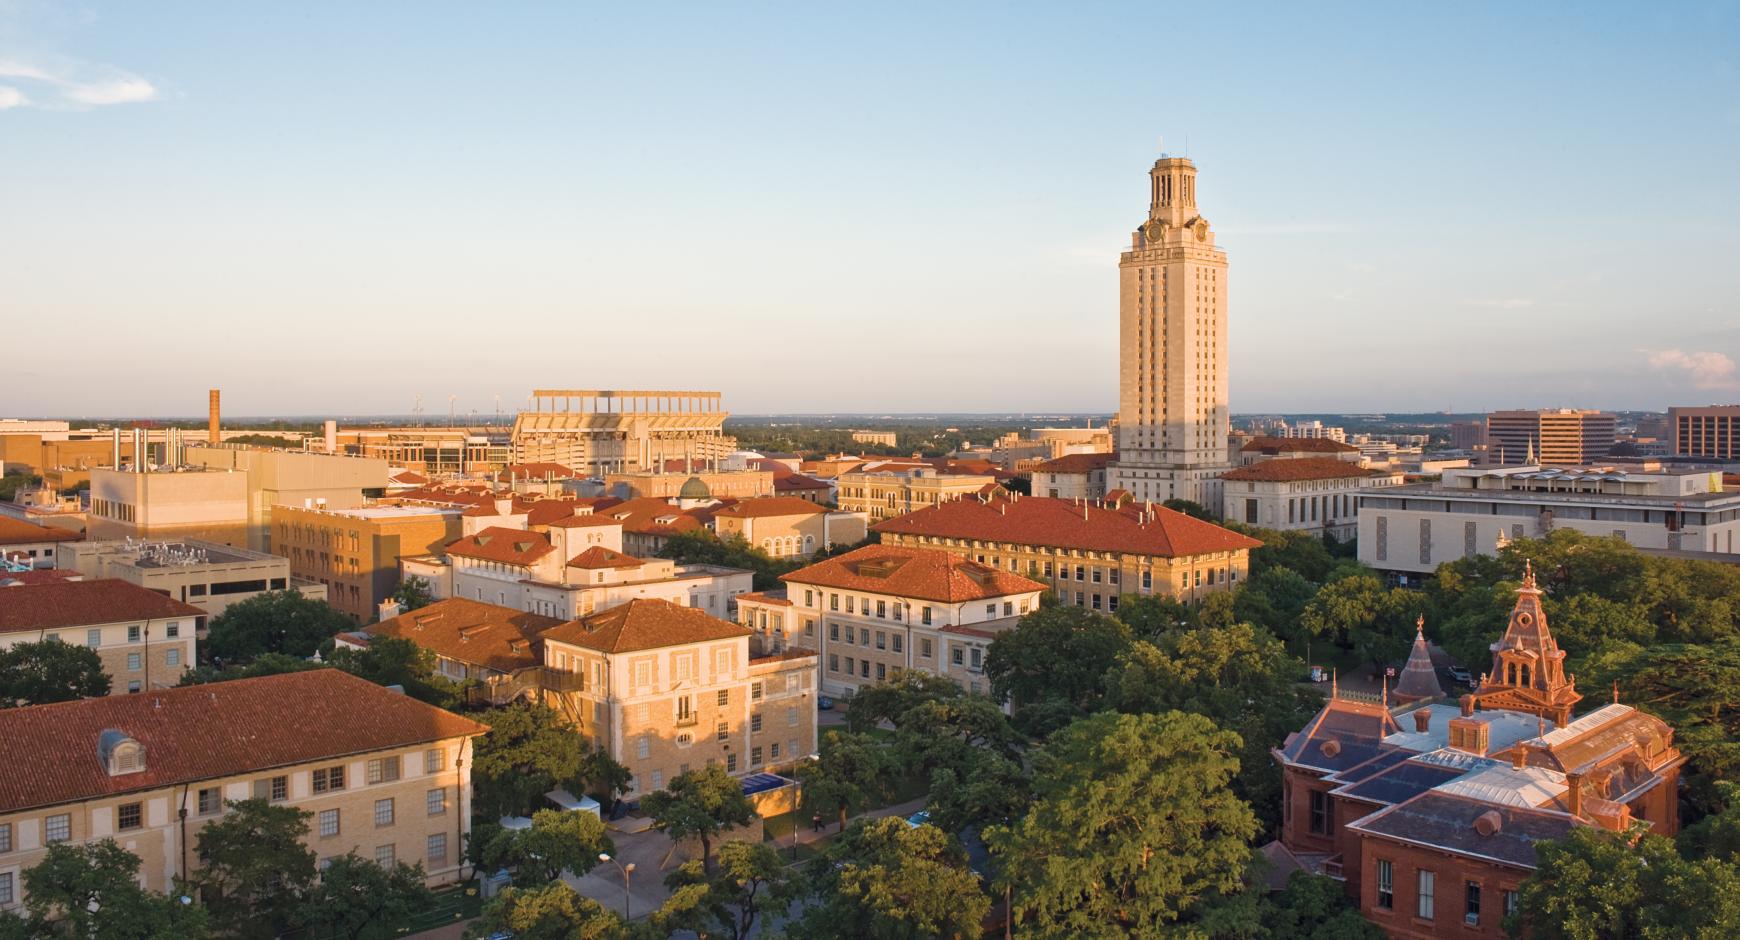 UT campus overview with the UT tower in the middle